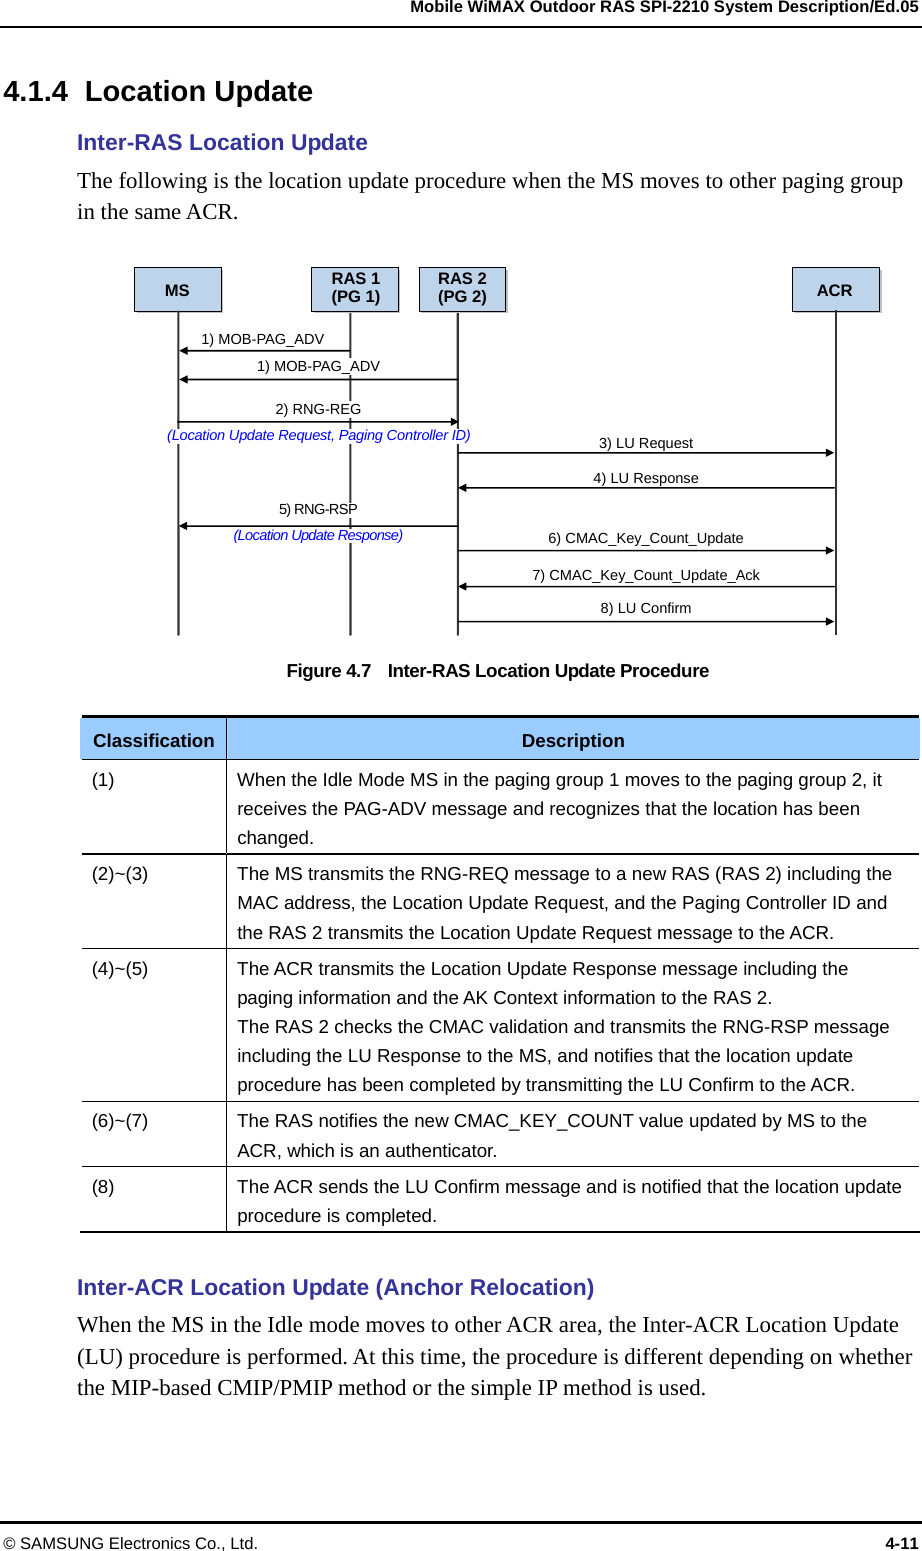   Mobile WiMAX Outdoor RAS SPI-2210 System Description/Ed.05 © SAMSUNG Electronics Co., Ltd.  4-11 4.1.4 Location Update Inter-RAS Location Update The following is the location update procedure when the MS moves to other paging group in the same ACR.  Figure 4.7    Inter-RAS Location Update Procedure  Classification  Description (1)  When the Idle Mode MS in the paging group 1 moves to the paging group 2, it receives the PAG-ADV message and recognizes that the location has been changed. (2)~(3)  The MS transmits the RNG-REQ message to a new RAS (RAS 2) including the MAC address, the Location Update Request, and the Paging Controller ID and the RAS 2 transmits the Location Update Request message to the ACR. (4)~(5)  The ACR transmits the Location Update Response message including the paging information and the AK Context information to the RAS 2.   The RAS 2 checks the CMAC validation and transmits the RNG-RSP message including the LU Response to the MS, and notifies that the location update procedure has been completed by transmitting the LU Confirm to the ACR. (6)~(7)  The RAS notifies the new CMAC_KEY_COUNT value updated by MS to the ACR, which is an authenticator. (8)  The ACR sends the LU Confirm message and is notified that the location update procedure is completed.  Inter-ACR Location Update (Anchor Relocation) When the MS in the Idle mode moves to other ACR area, the Inter-ACR Location Update (LU) procedure is performed. At this time, the procedure is different depending on whether the MIP-based CMIP/PMIP method or the simple IP method is used. MS RAS 1(PG 1) ACR1) MOB-PAG_ADV 5) RNG-RSP(Location Update Response)RAS 2(PG 2)1) MOB-PAG_ADV 2) RNG-REG (Location Update Request, Paging Controller ID) 3) LU Request 4) LU Response 6) CMAC_Key_Count_Update 7) CMAC_Key_Count_Update_Ack 8) LU Confirm